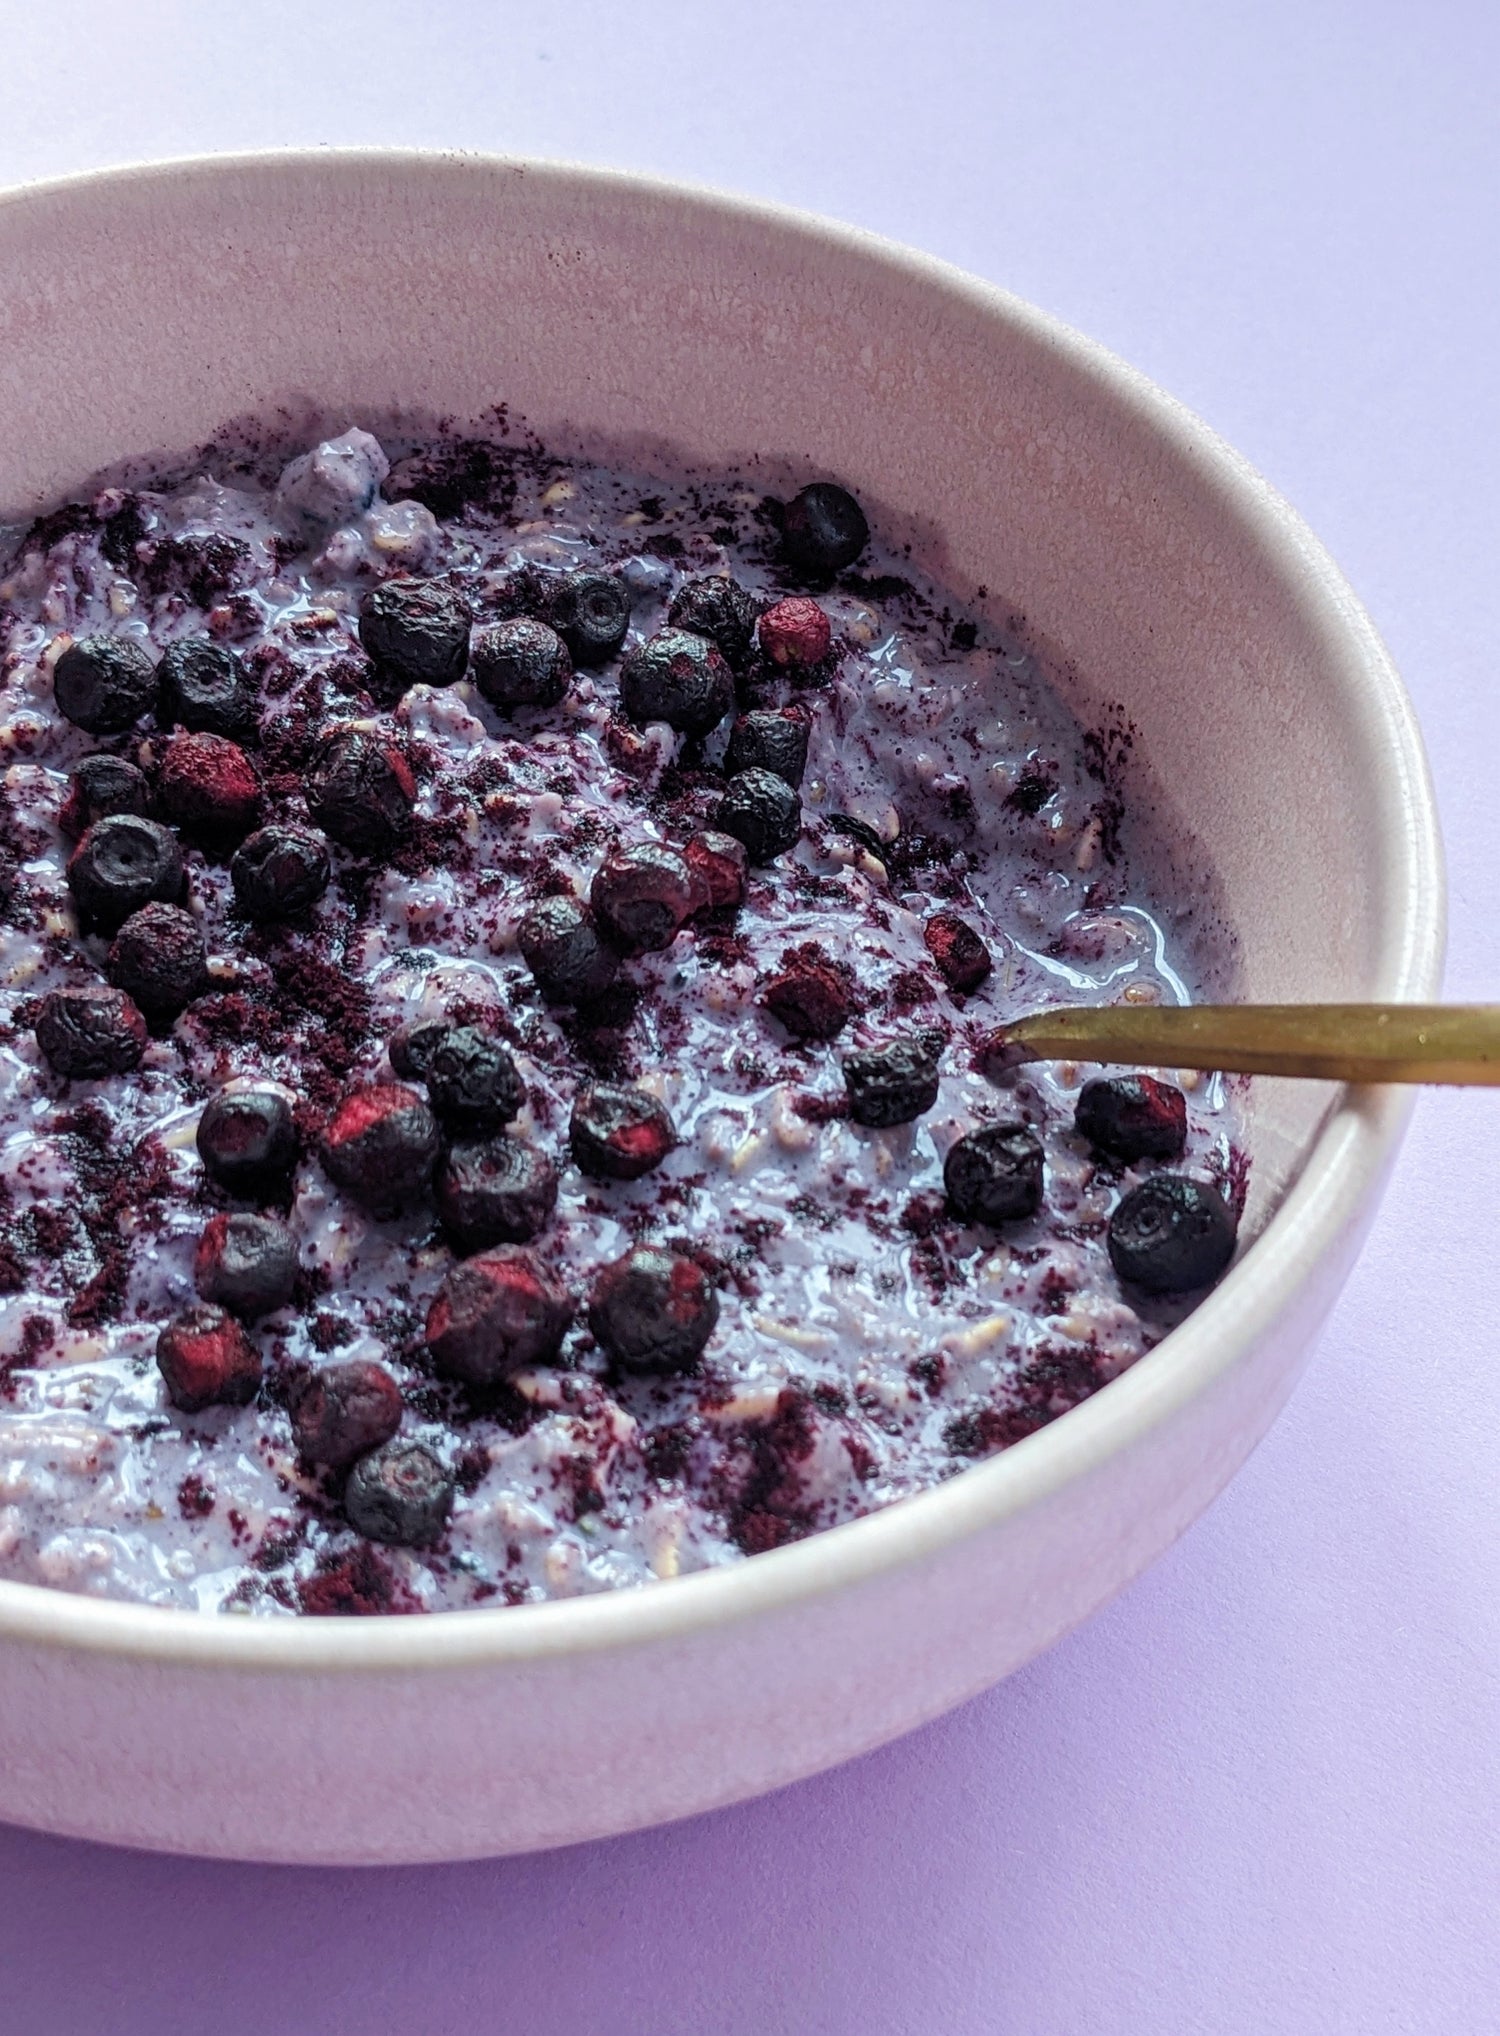 Puuro wild bilberry & black currant Nordic oats in a bowl with a spoon with blueberries sprinkled on top